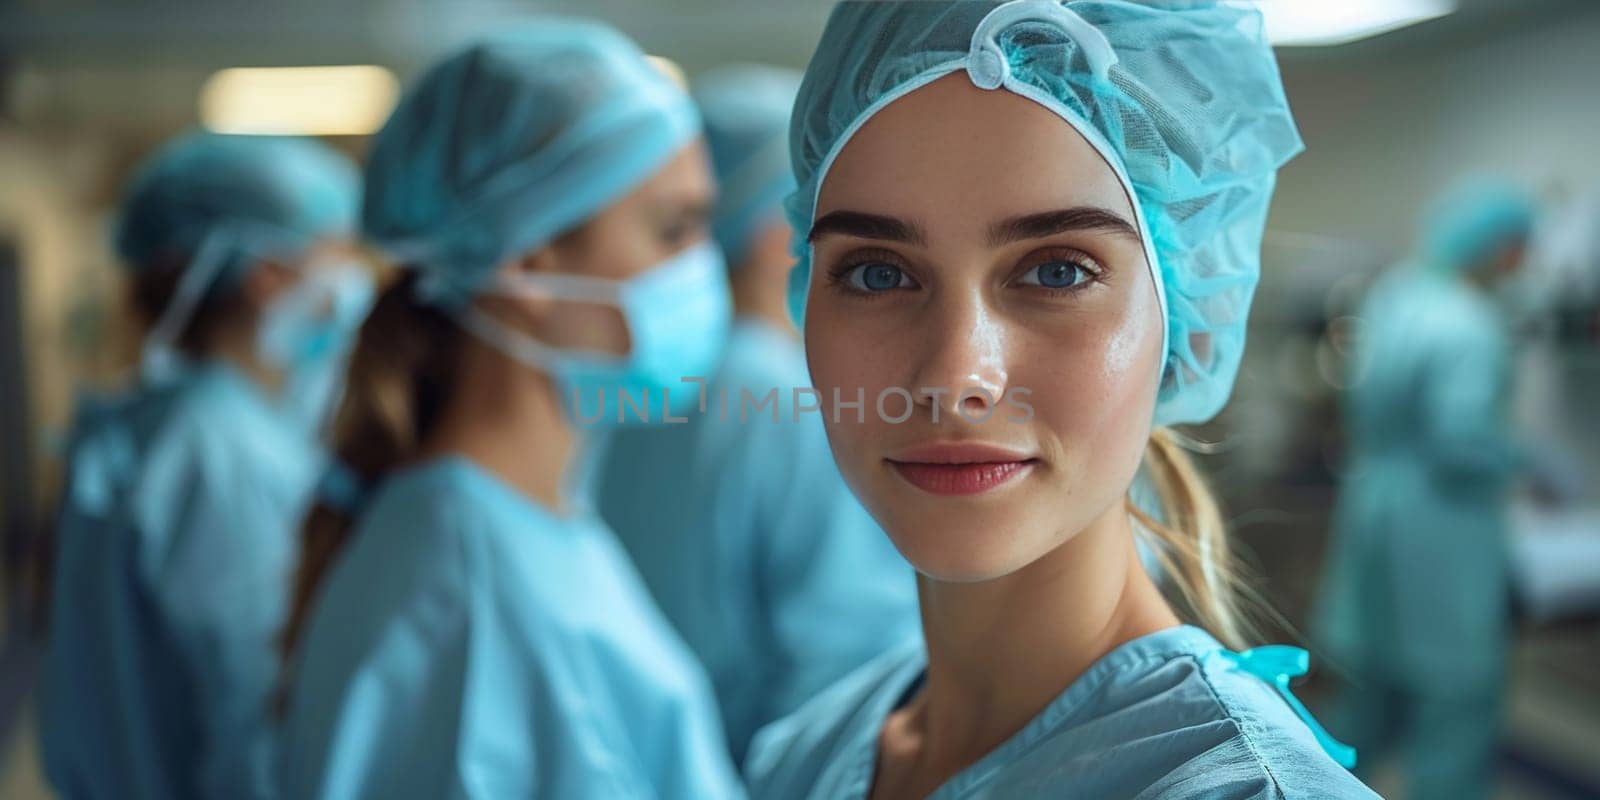 A female health care provider in surgical scrubs, wearing a cap and gown, smiles at the camera in the operating room, showcasing her eyebrows and eyelashes